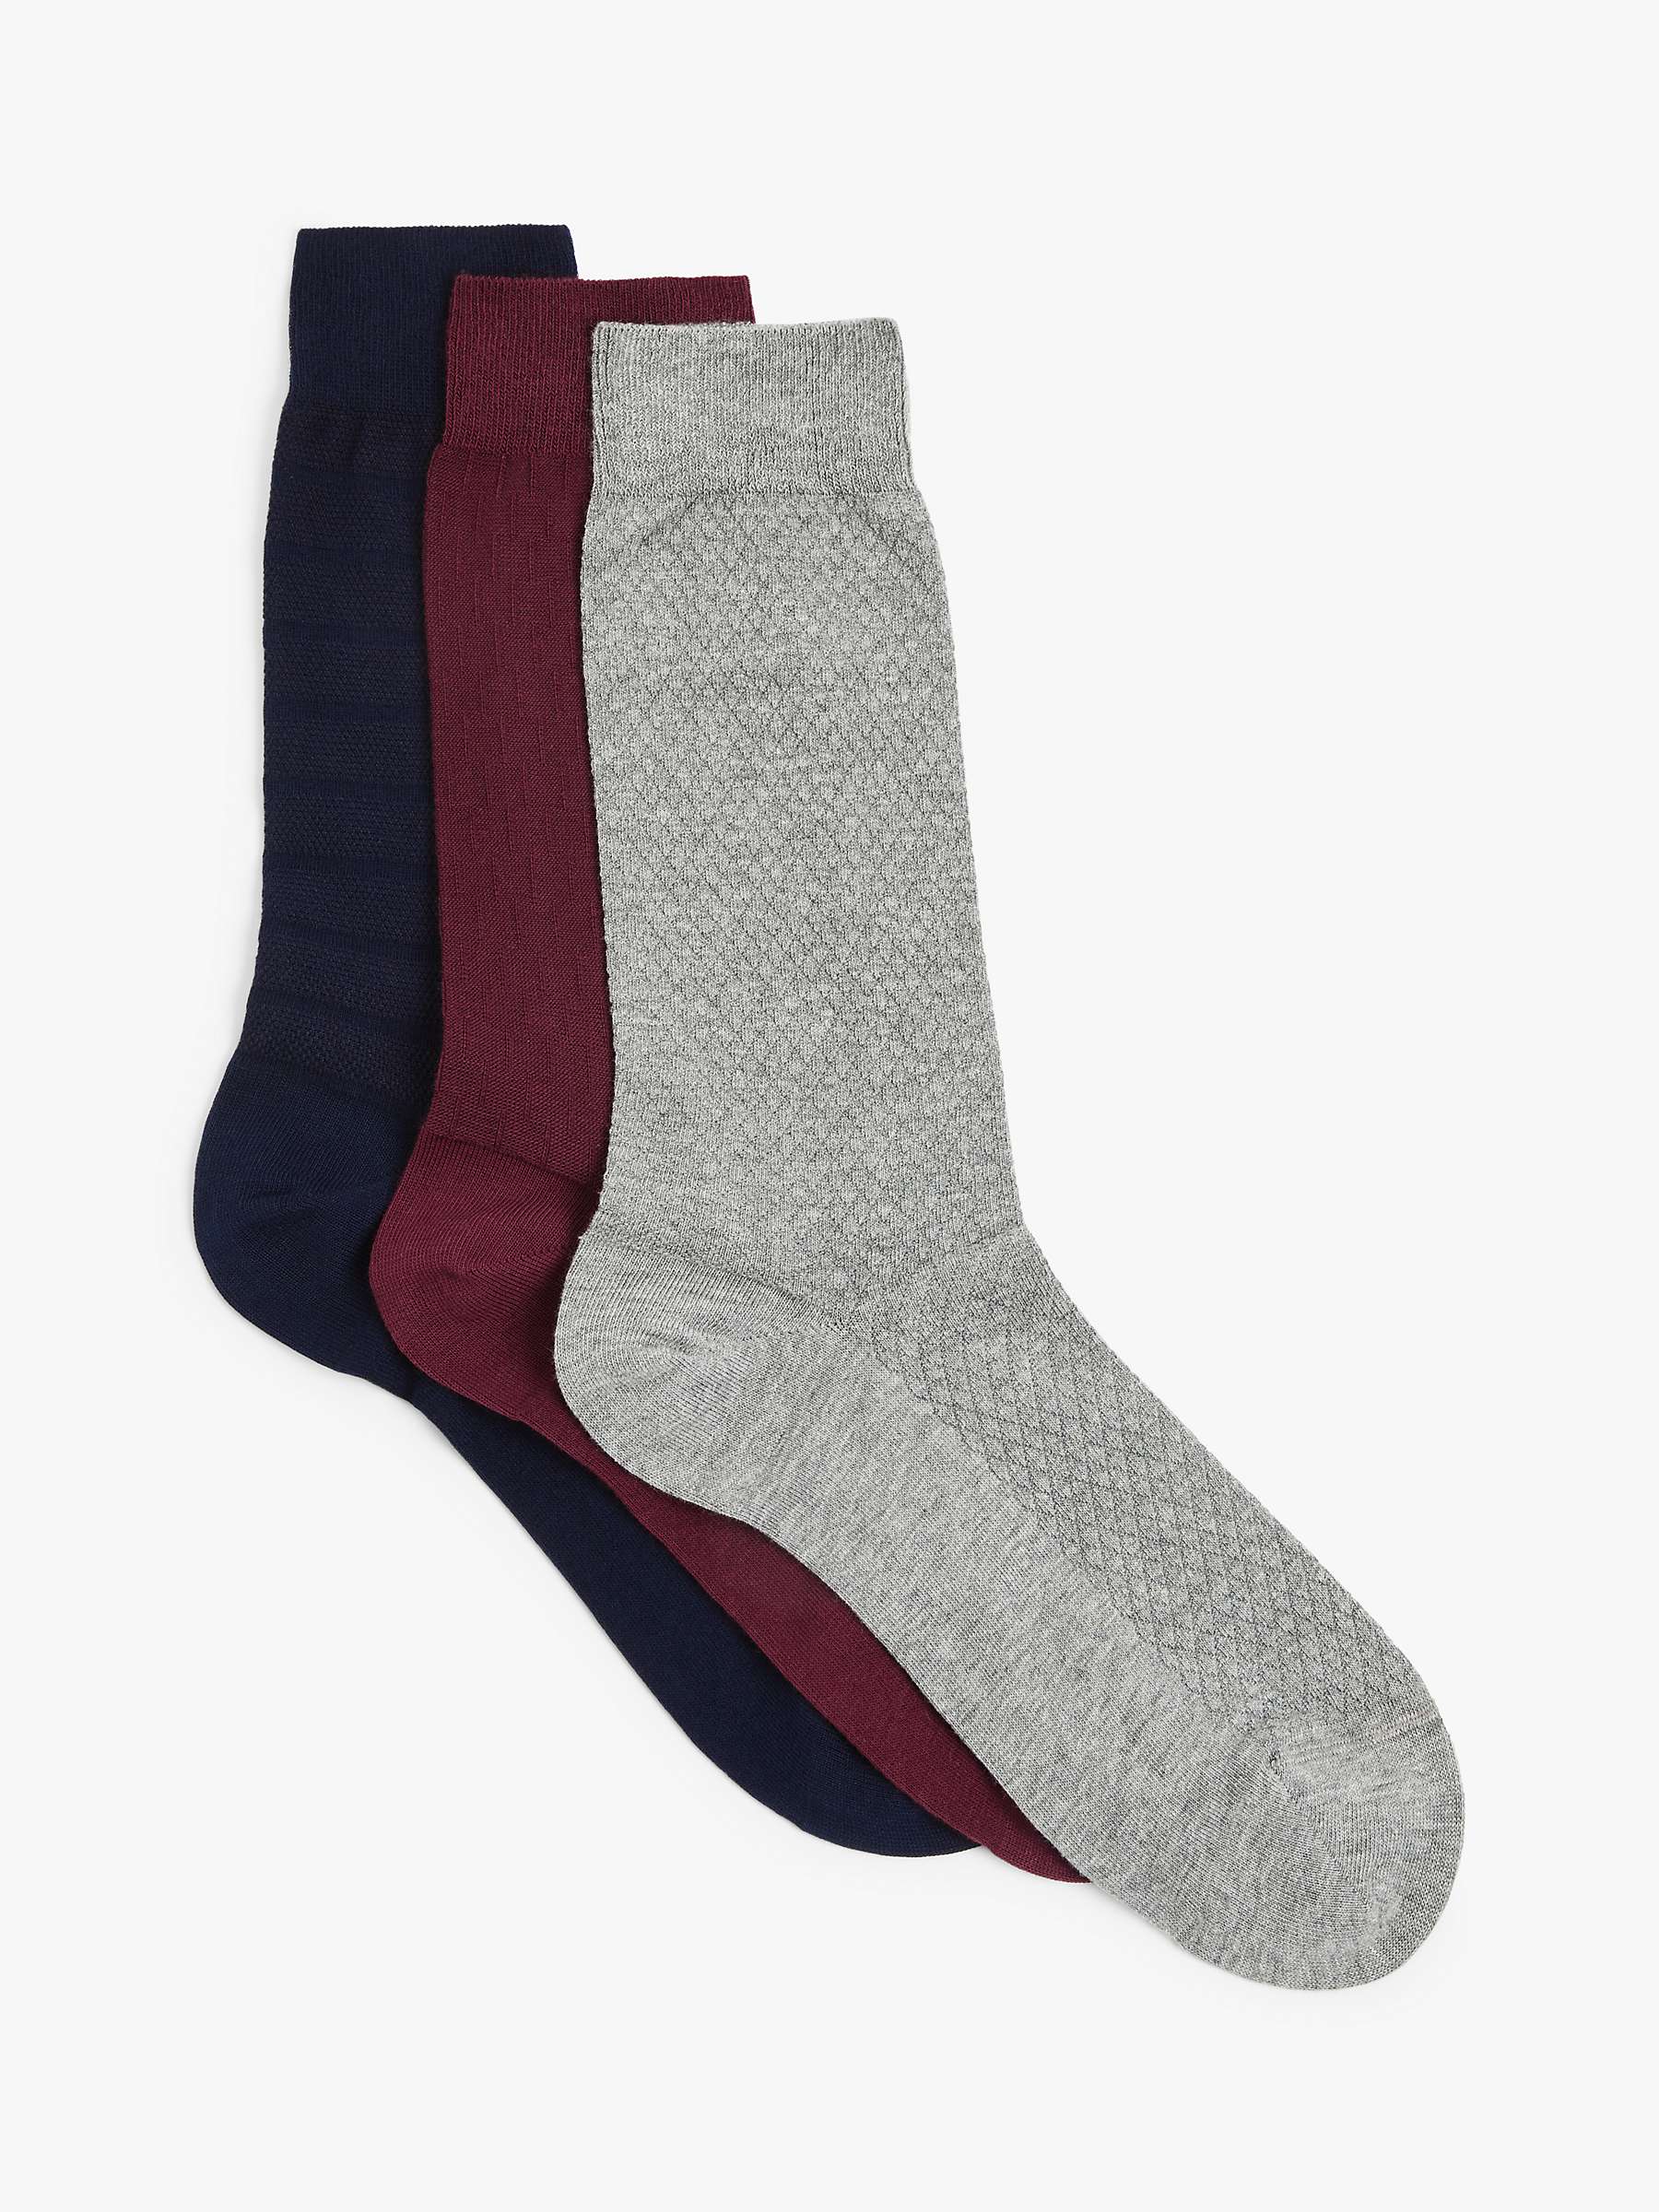 Buy John Lewis Made in Italy Cotton Textured Socks, Pack of 3, Multi Online at johnlewis.com